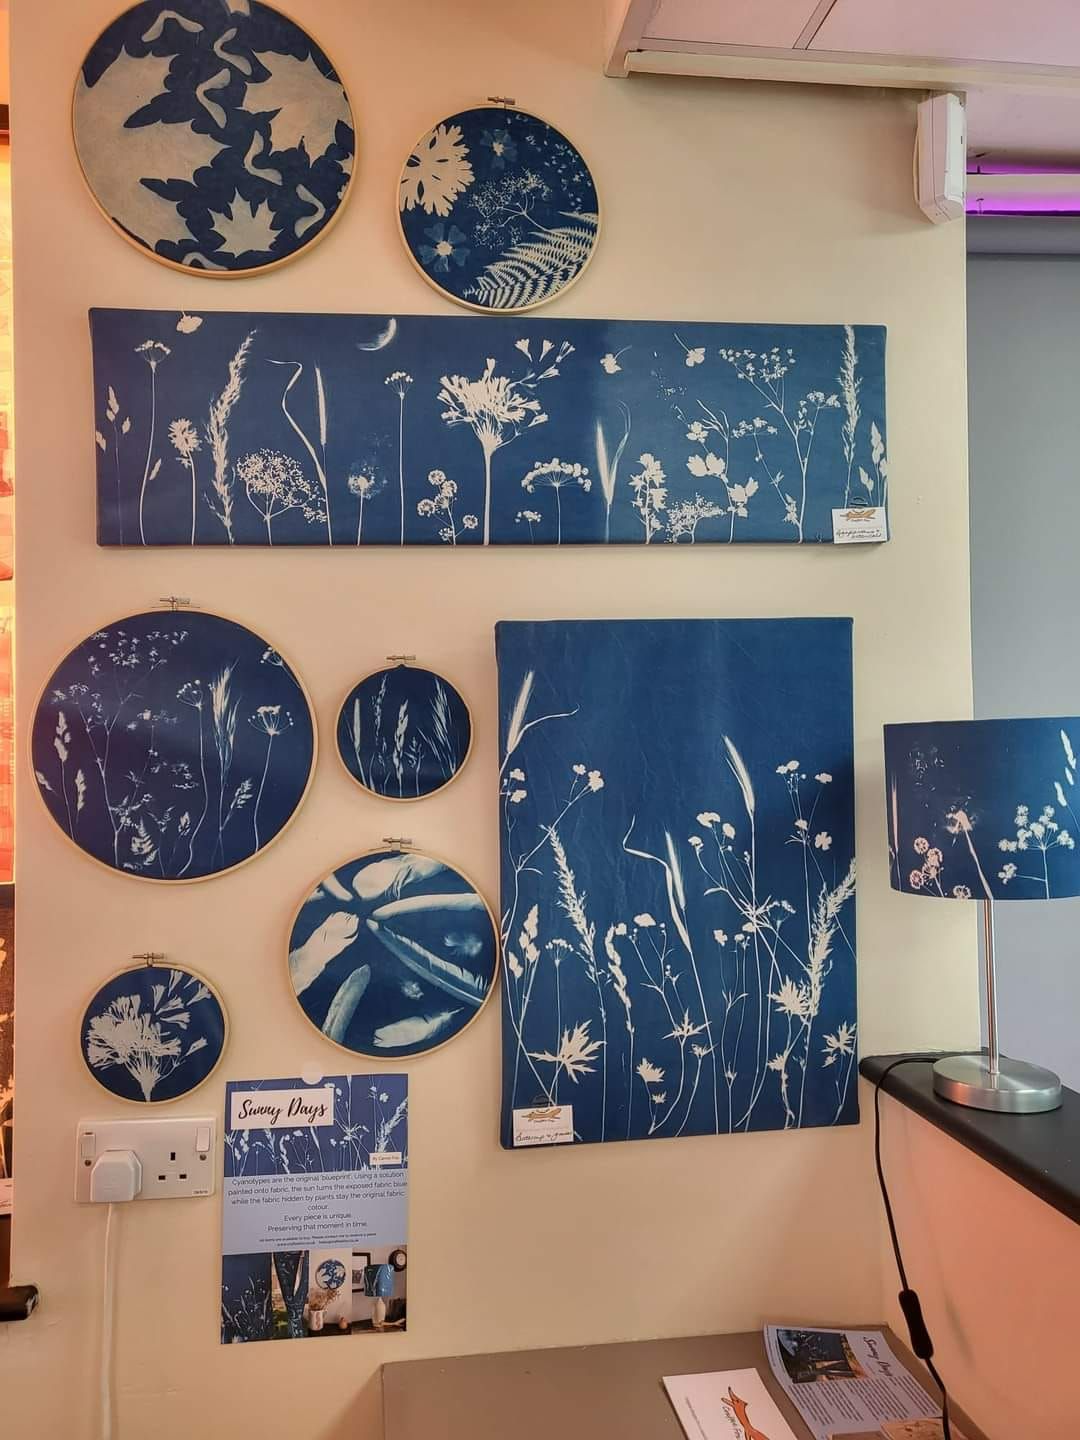 A wall is covered with cyanotype prints showing plants sunprinted on the blue fabric